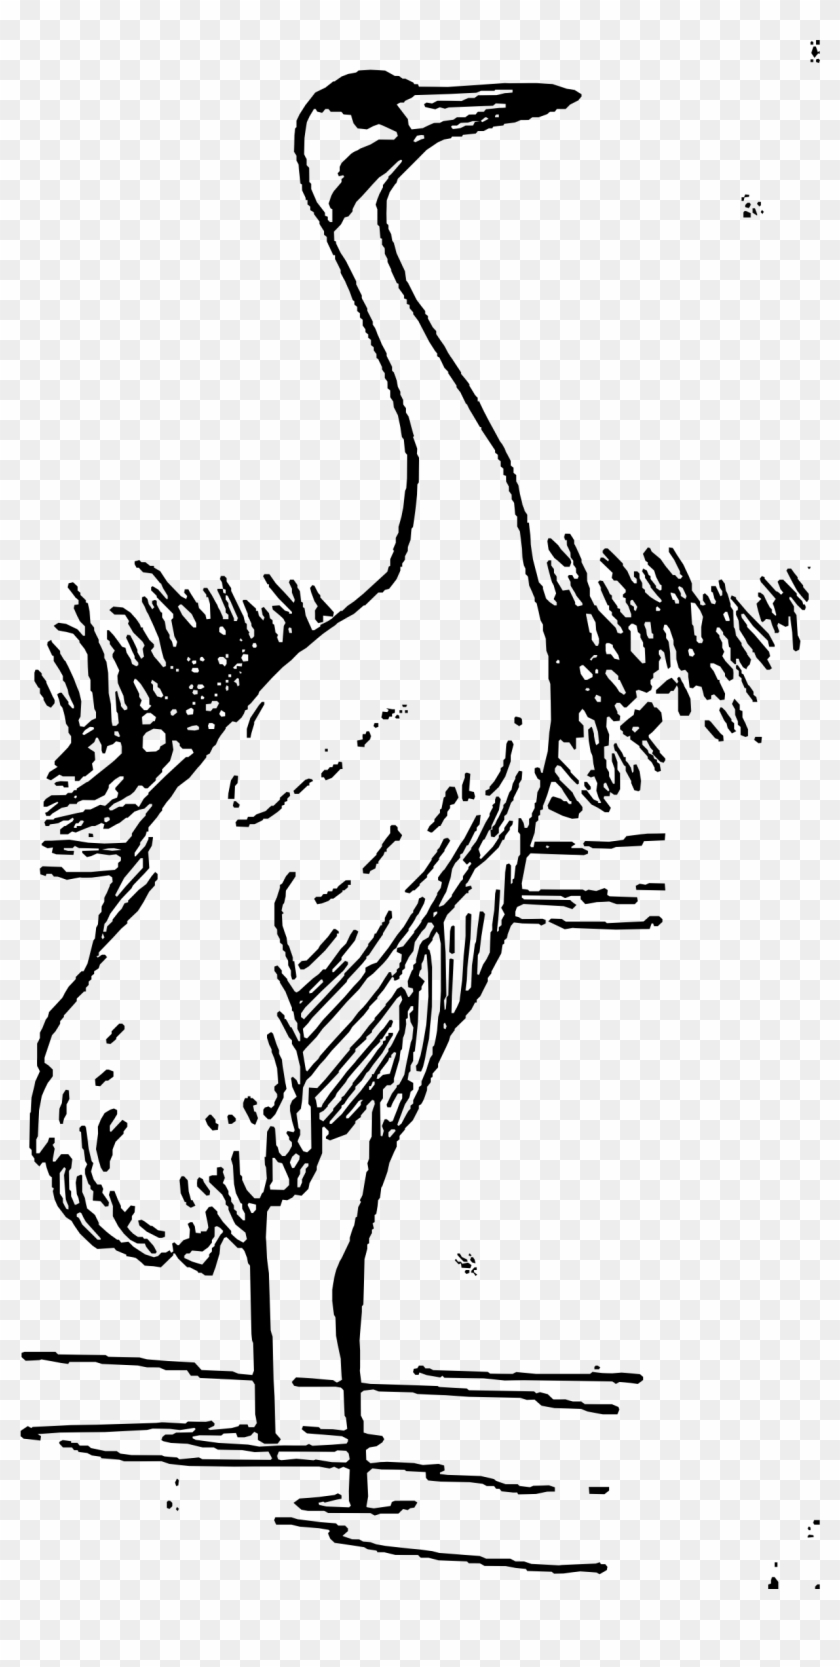 This Free Icons Png Design Of Whooping Crane - Outline Of Black Necked ...